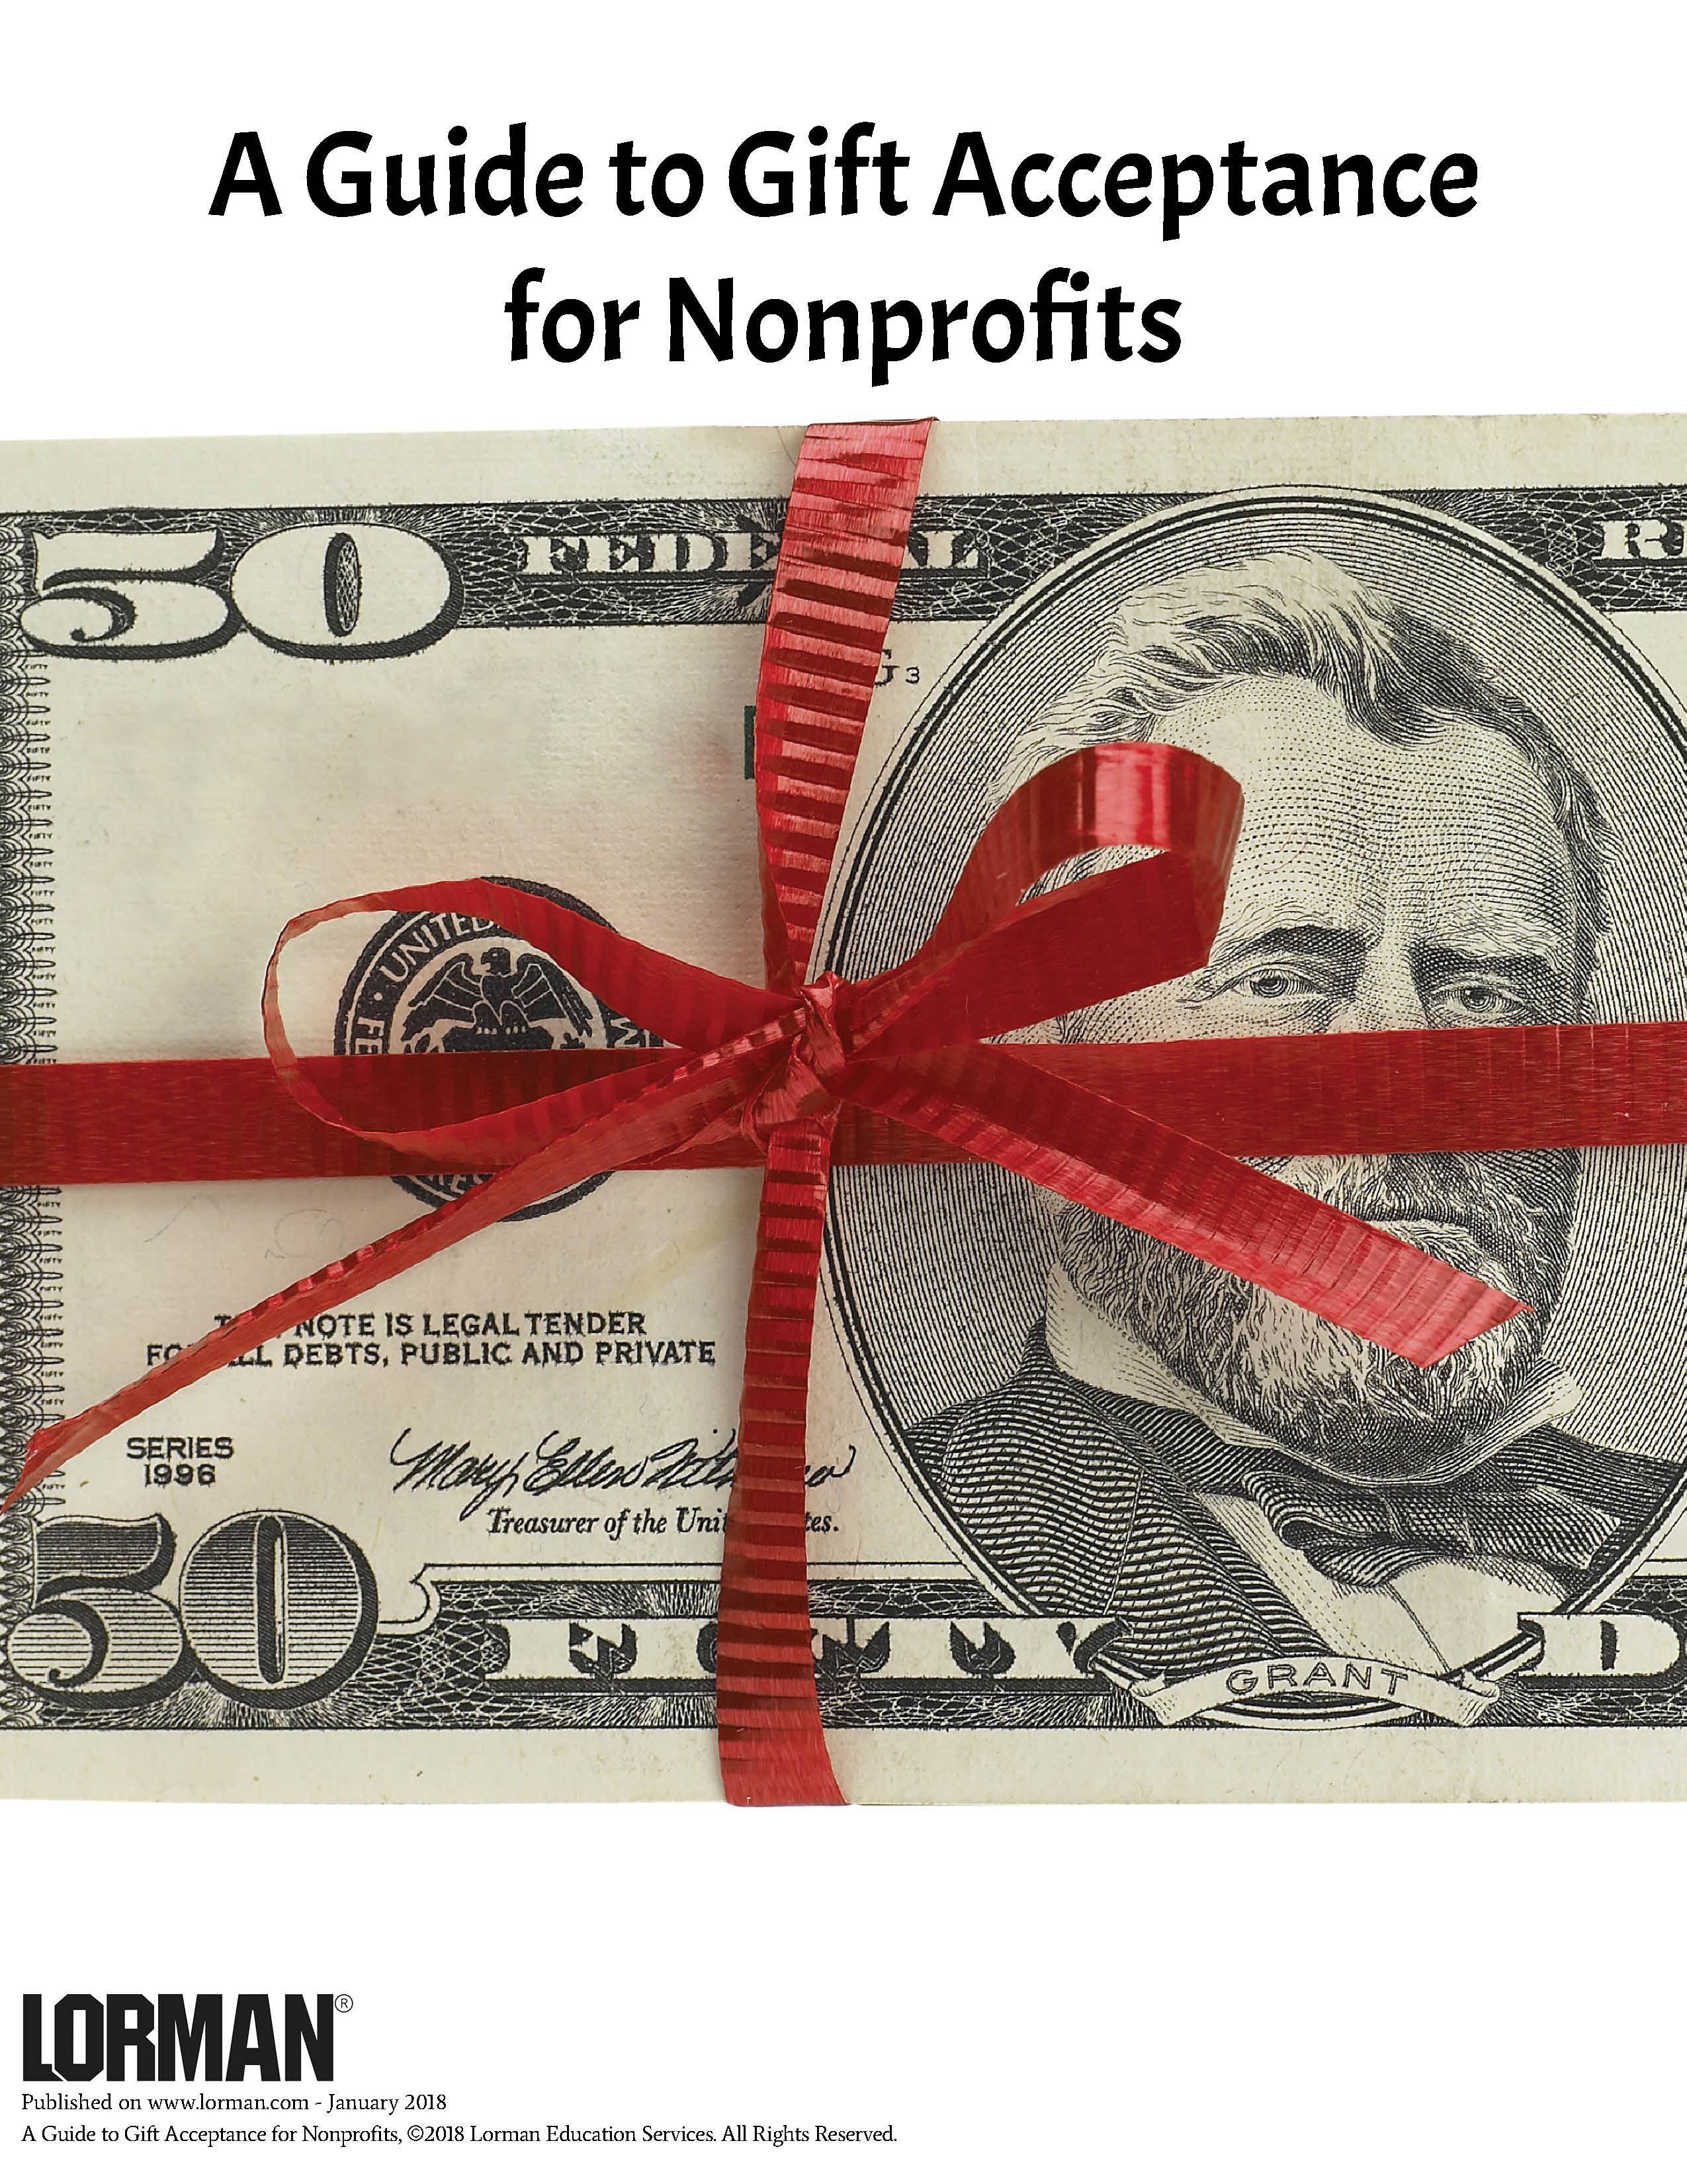 A Guide to Gift Acceptance for Nonprofits